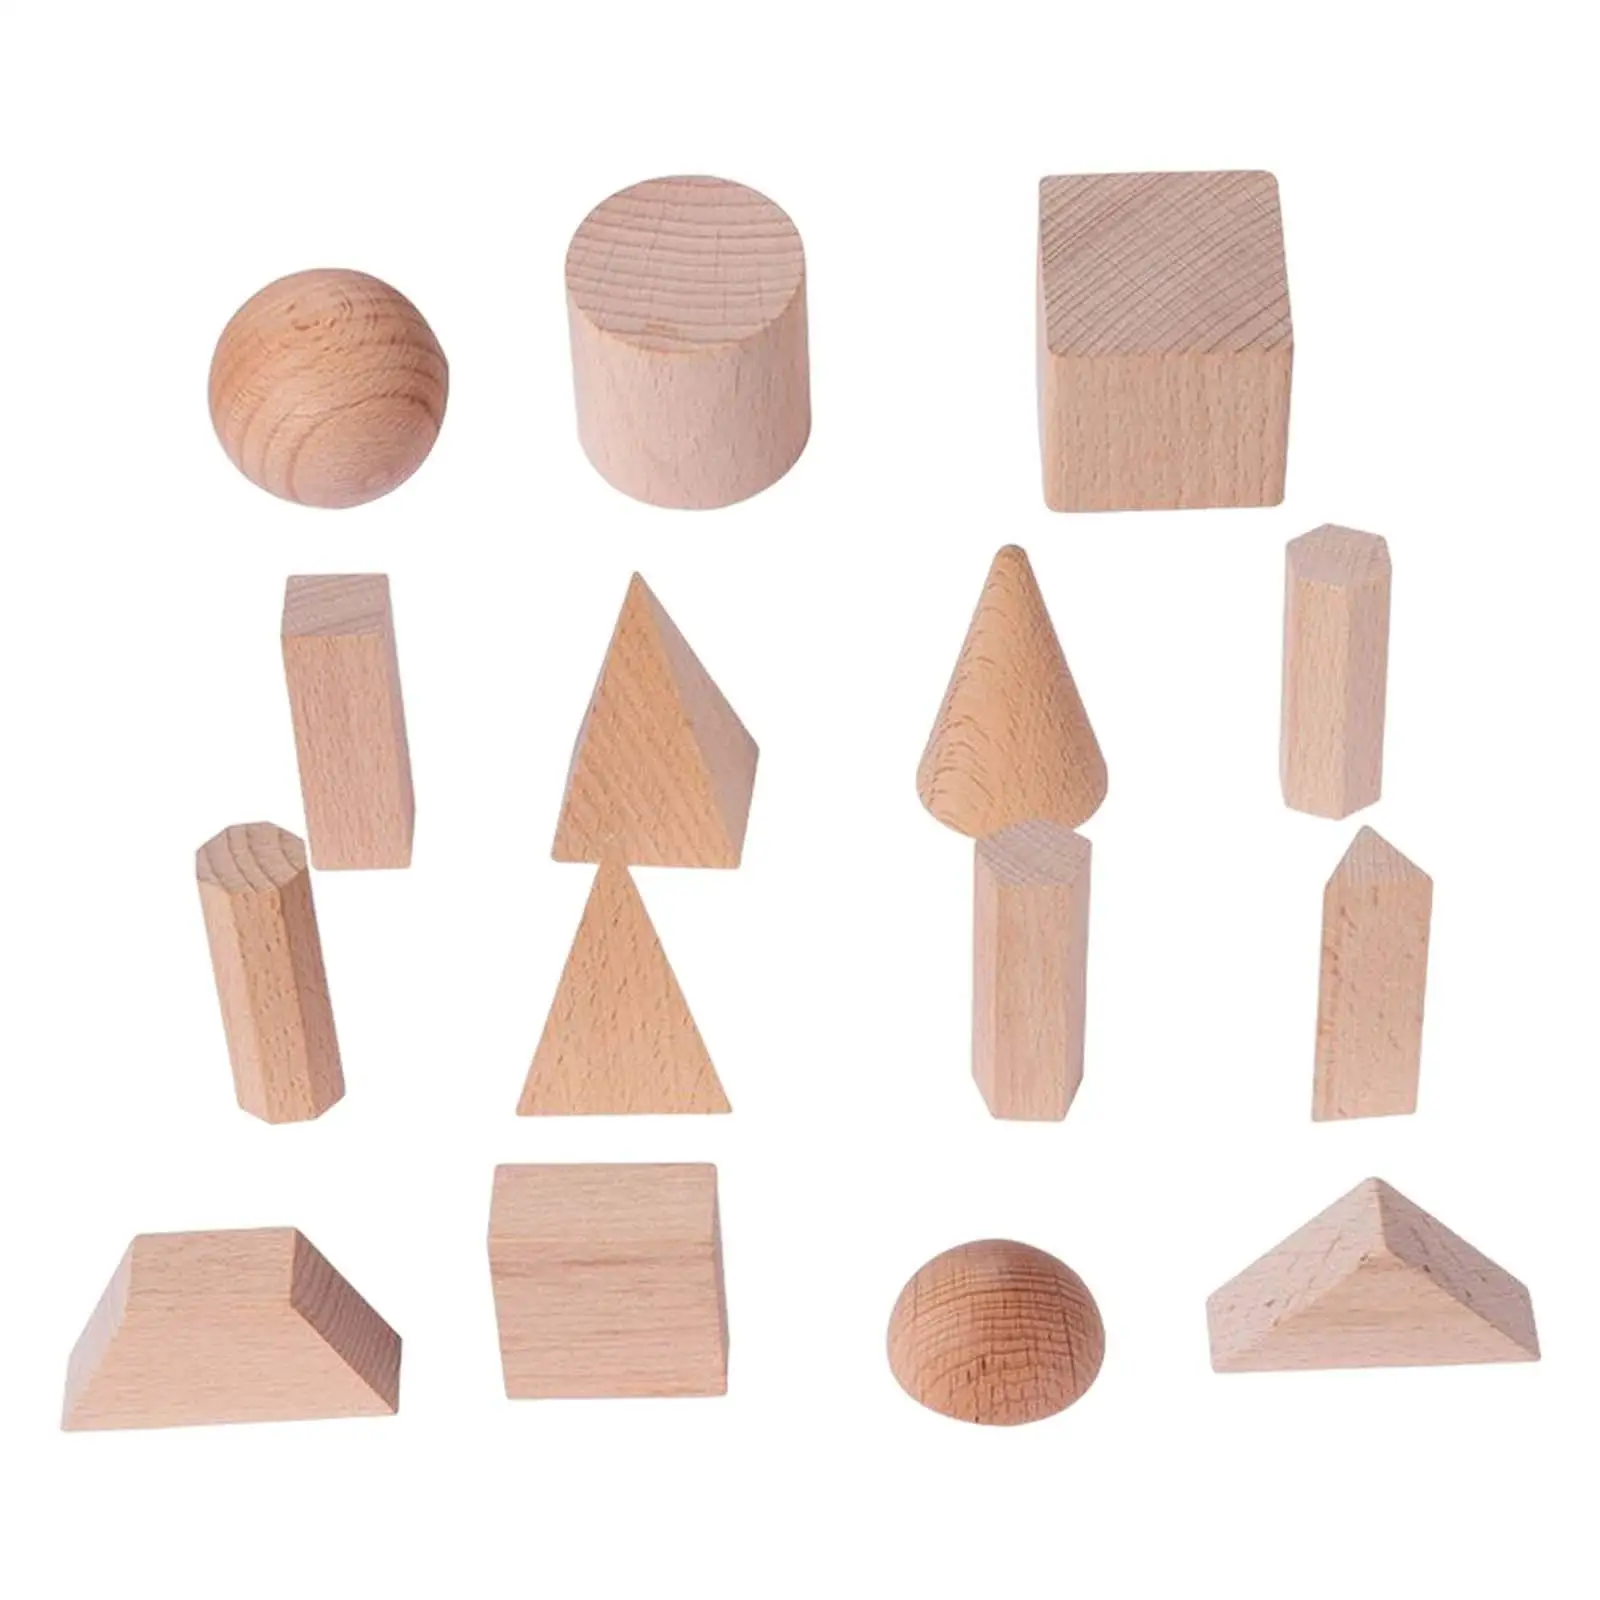 15x Wood Geometric Solids 3D Shapes Learning Education Math Toys Stacking Toy for Kids Toddler Babies Ages 2+